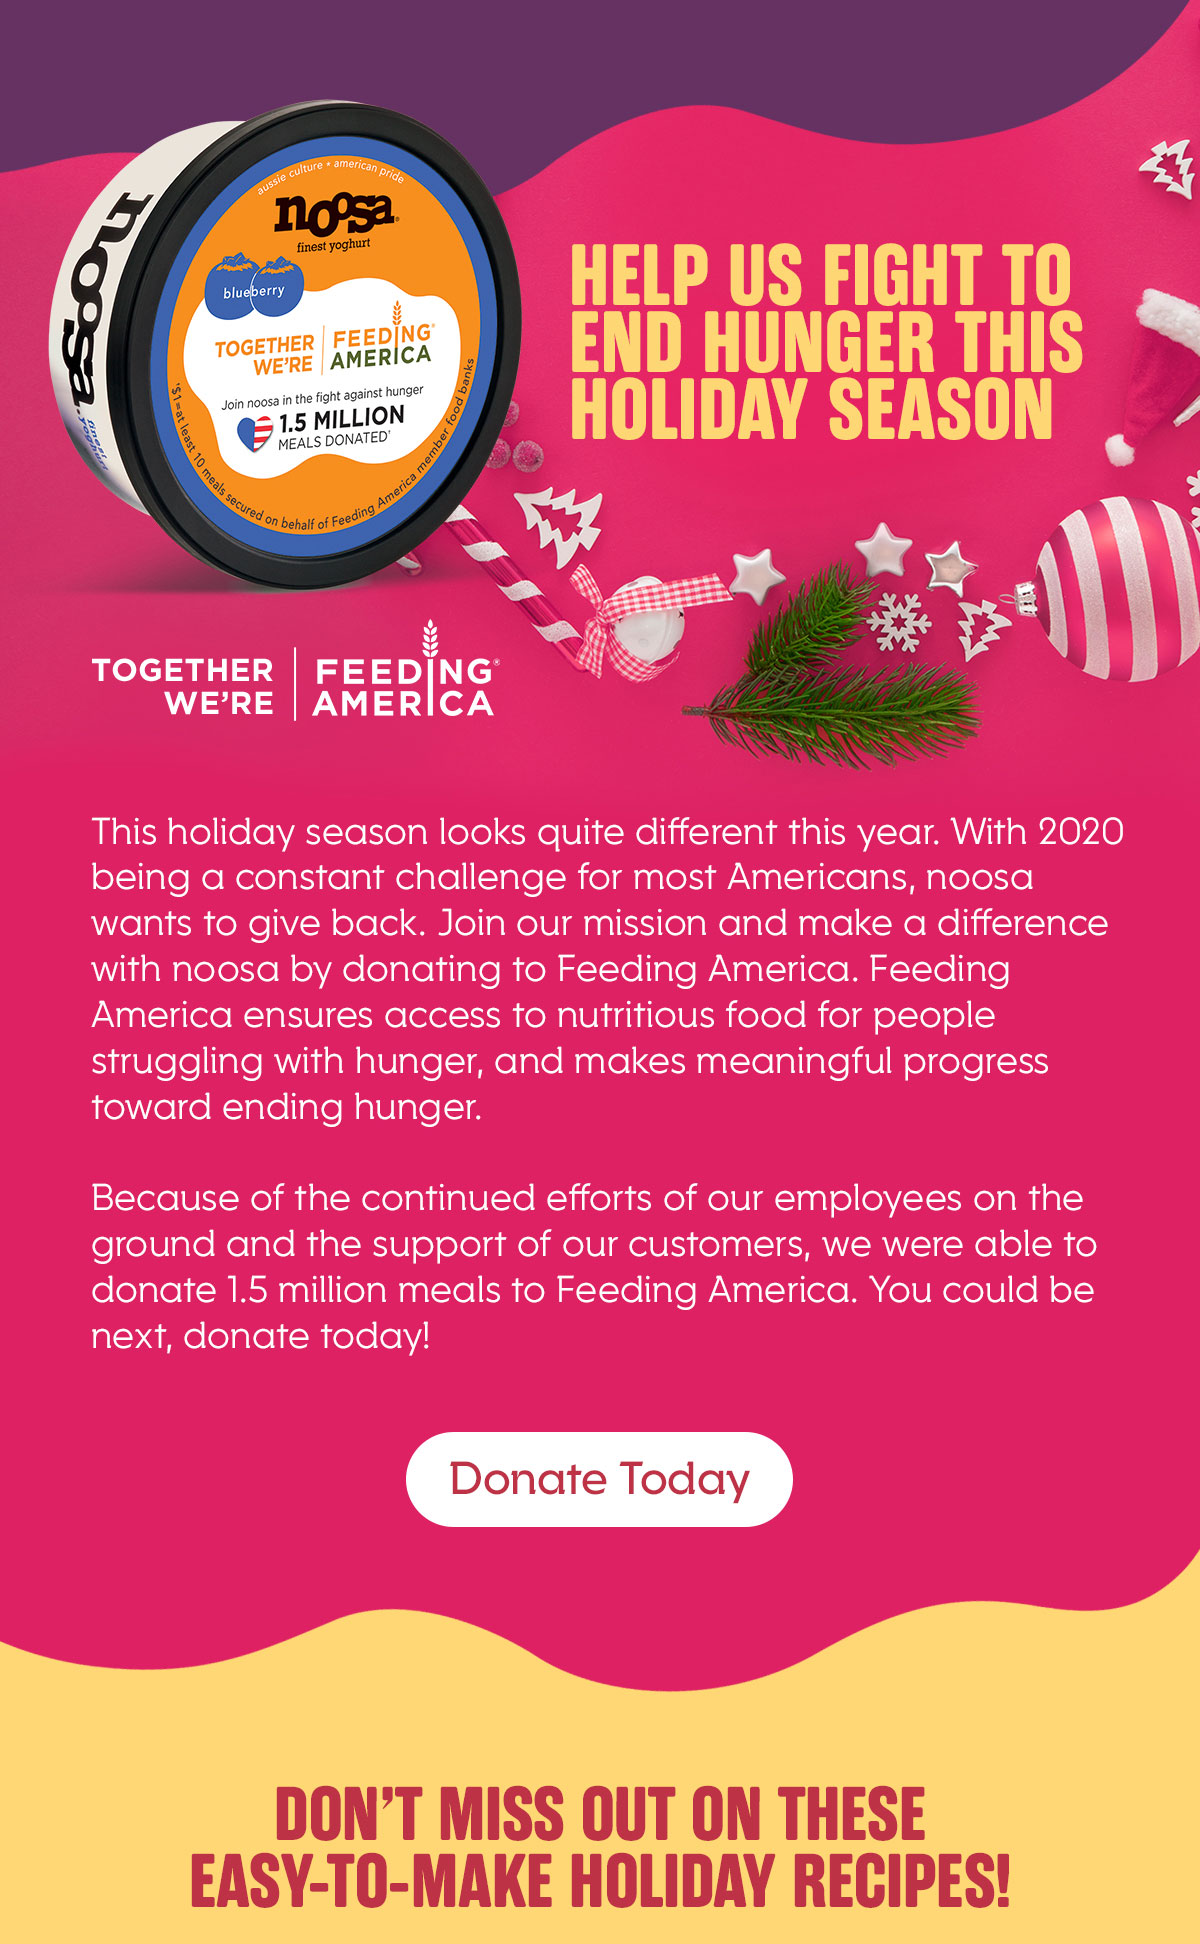 Help Us Fight TO END Hunger this Holiday Season. TOGETHER WE''RE FEEDING AMERICA.  This holiday season looks quite different this year. With 2020 being a constant challenge for most Americans, noosa wants to give back. Join our mission and make a difference with noosa by donating to Feeding America. Feeding America ensures access to nutritious food for people struggling with hunger, and makes meaningful progress toward ending hunger.  Because of the continued efforts of our employees on the ground and the support of our customers, we were able to donate 1.5 million meals to Feeding America. You could be next, donate today!